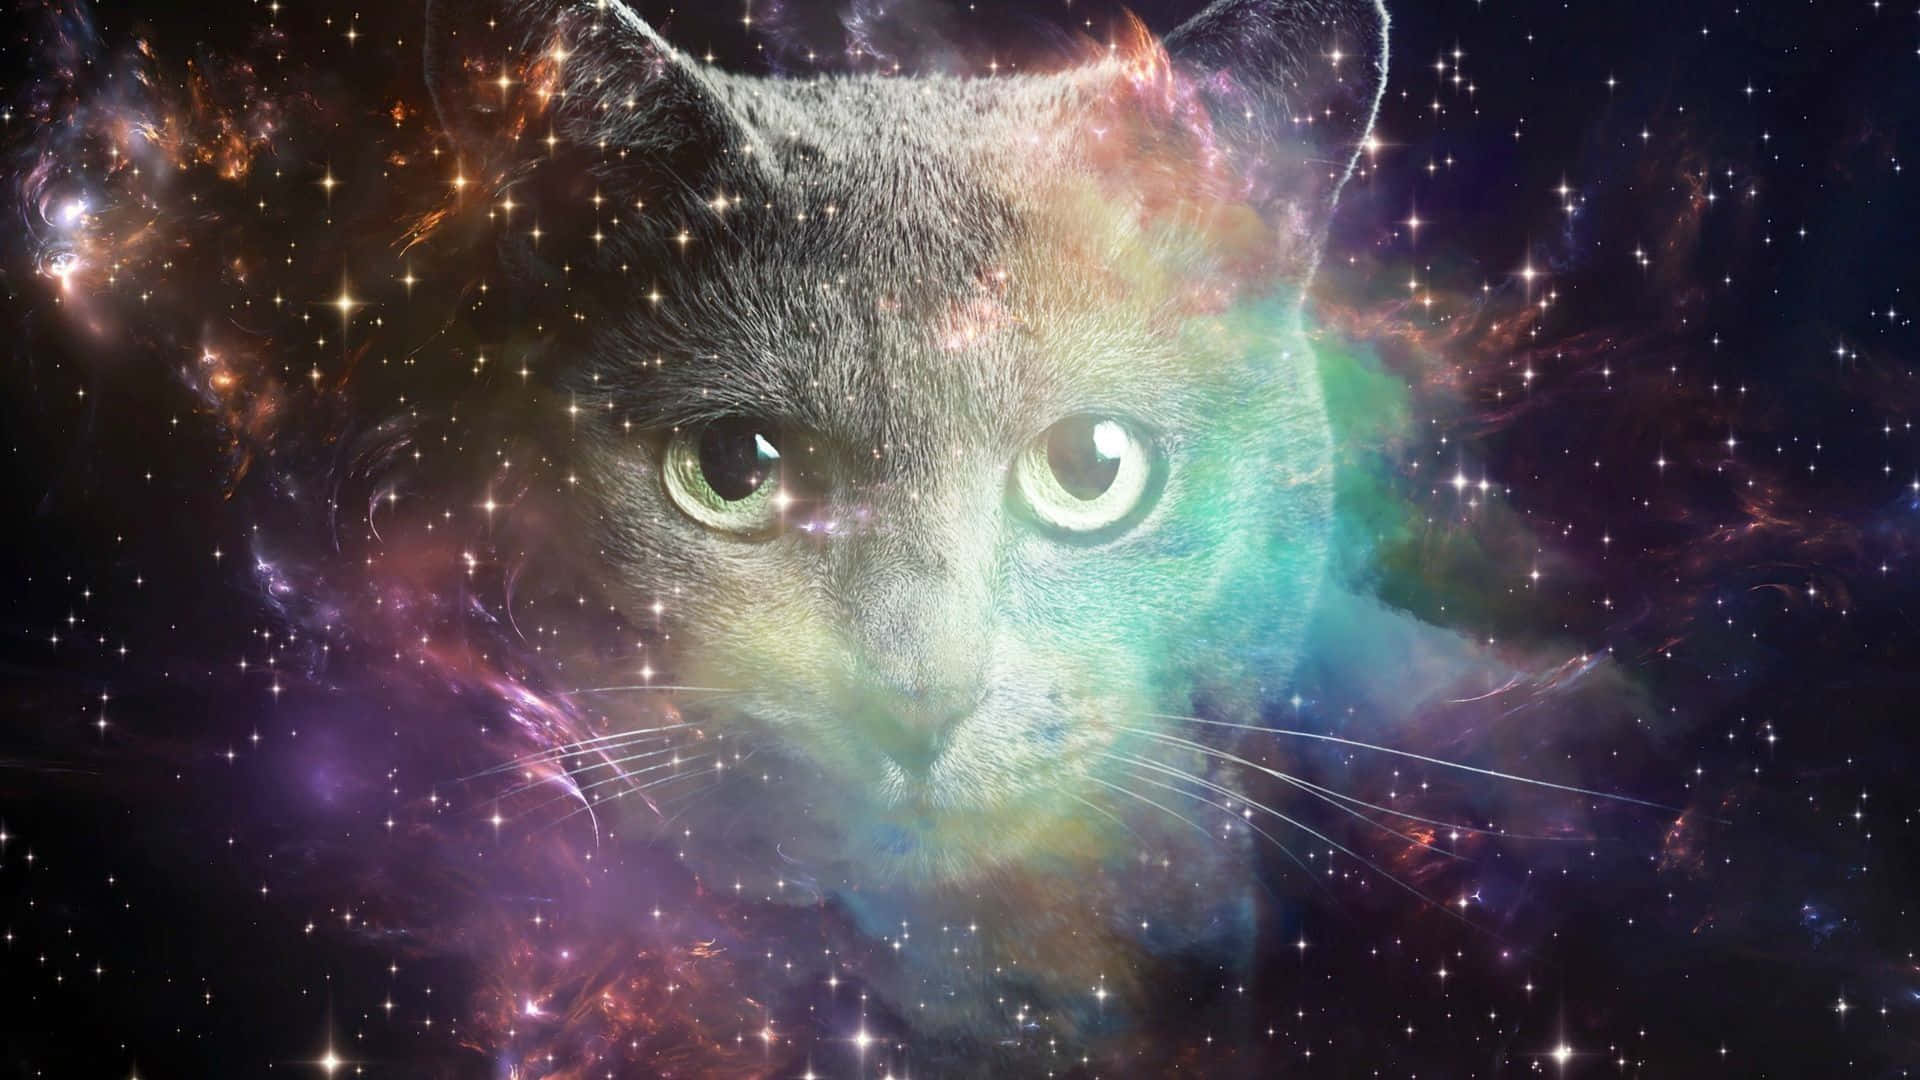 Amateur Astronomers Observe Cats in Space Wallpaper